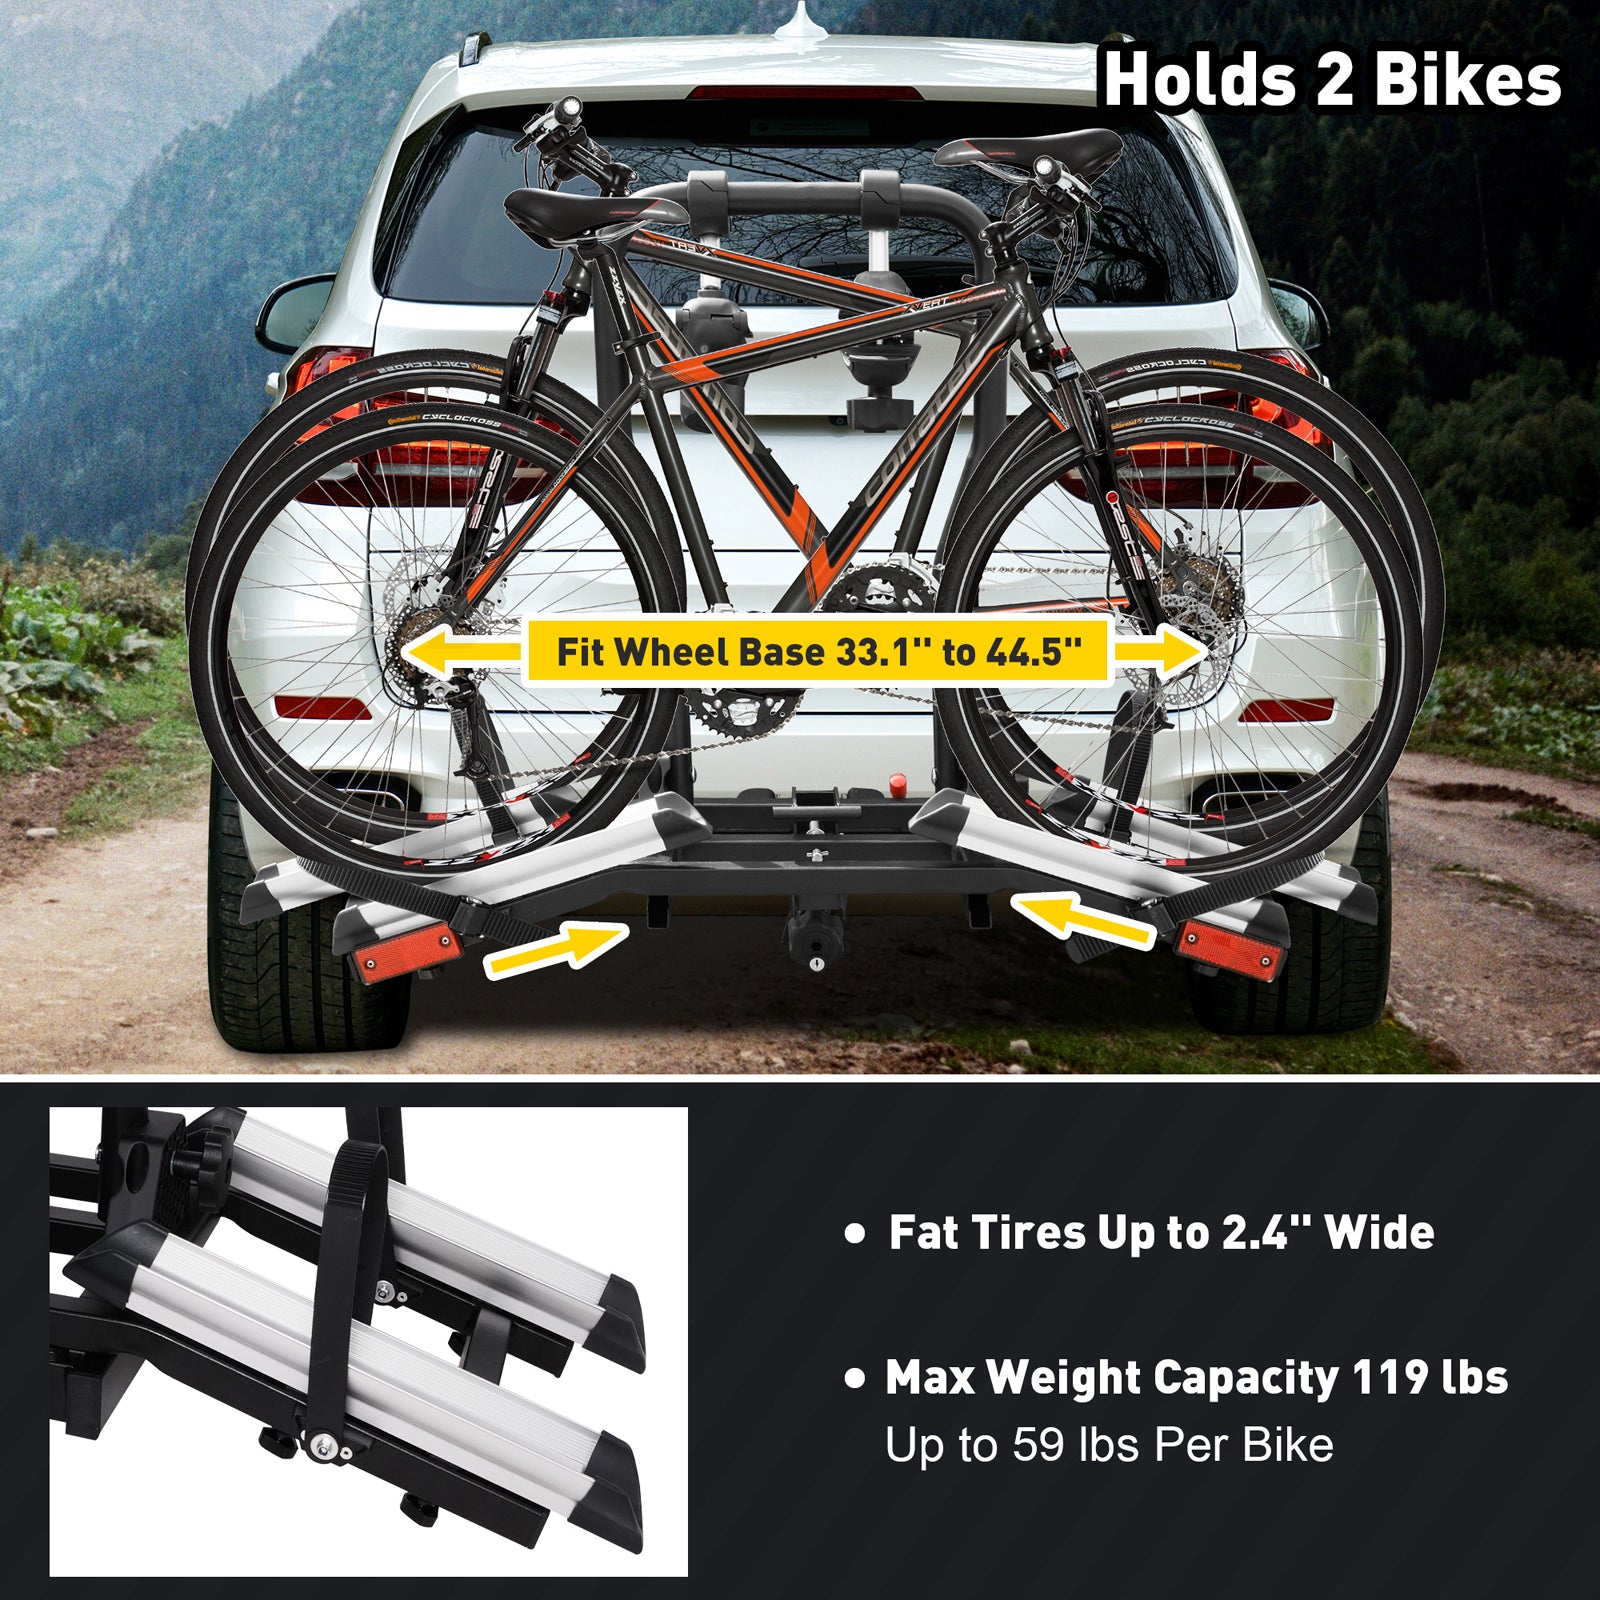 Hitch Bike Rack for 2 Bikes Foldable Platform Style Bicycle Car Racks with Adjustable Arms